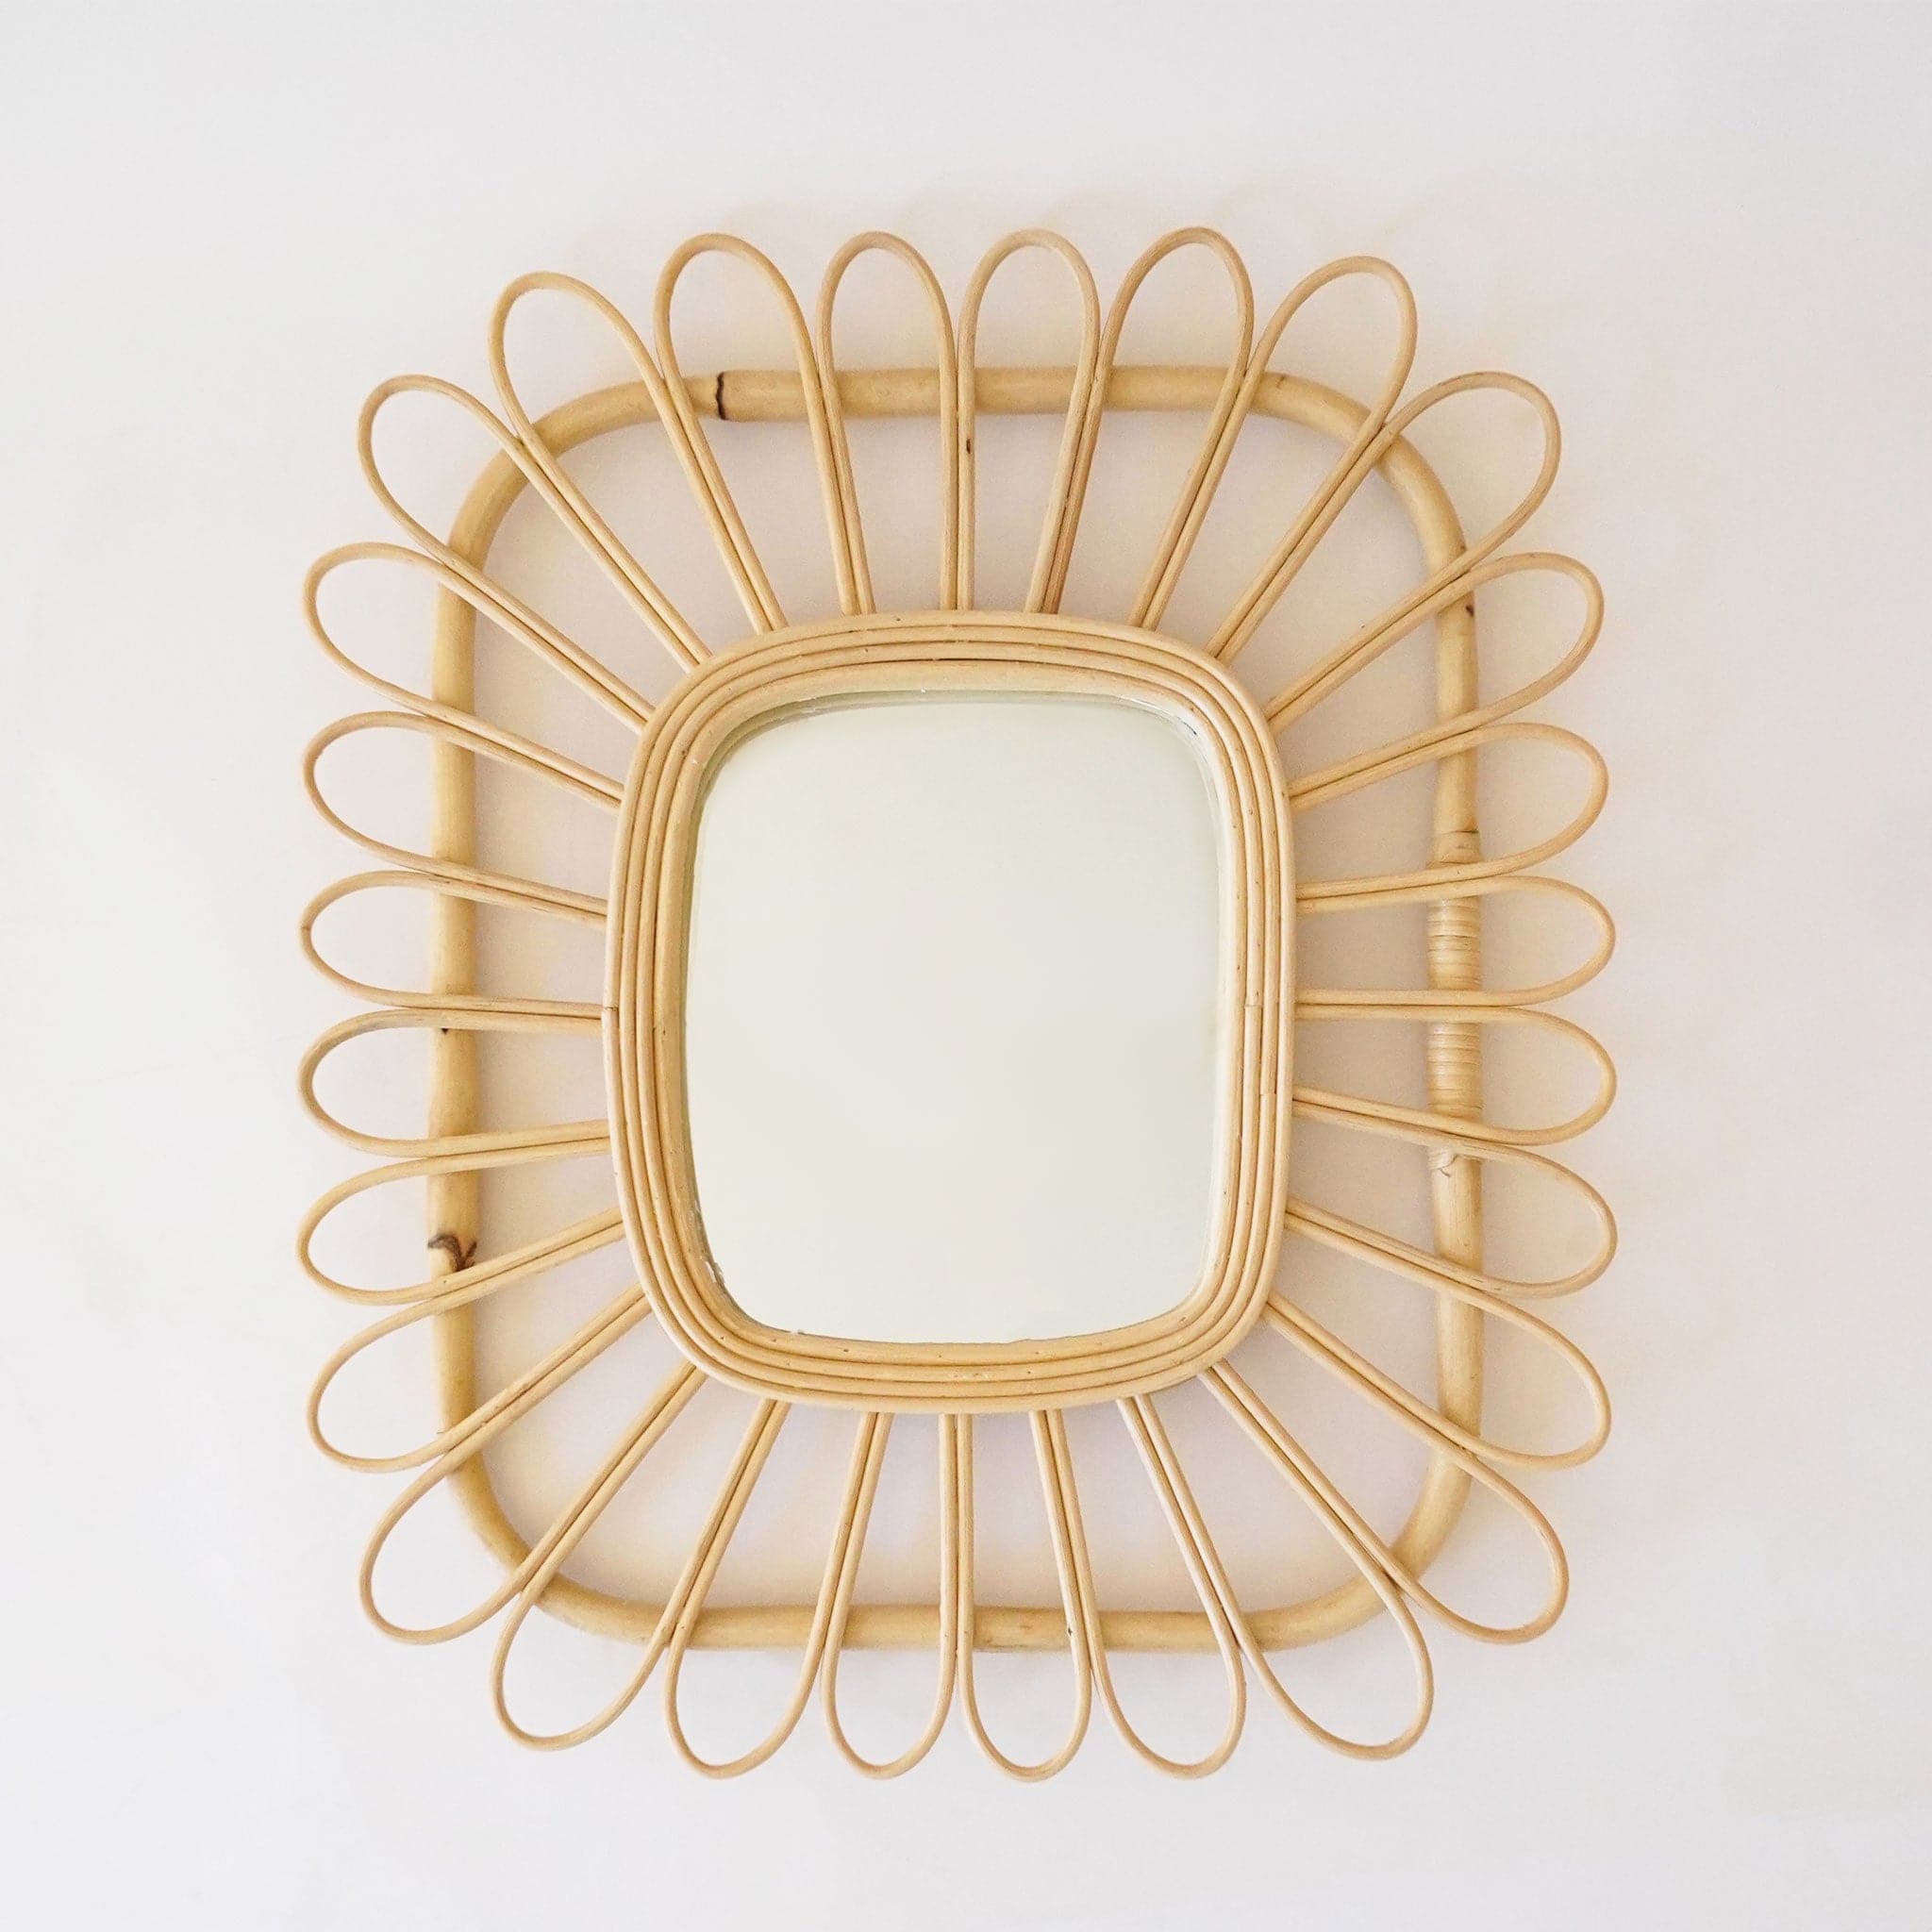 Rectangle shaped mirror with a piped rattan design. 